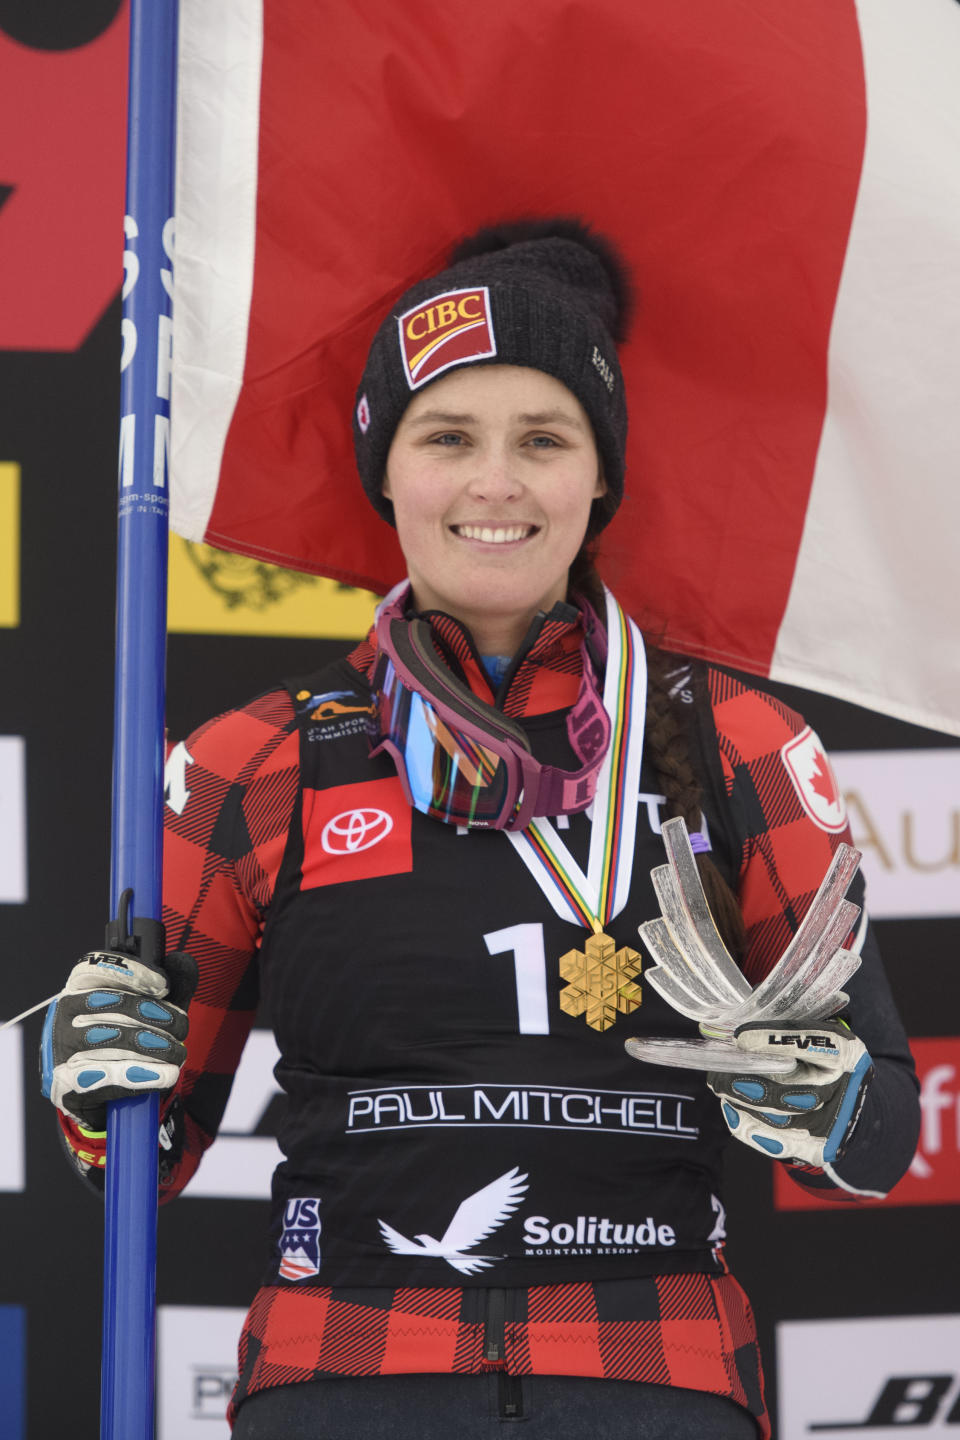 Gold medalist Marielle Thompson, of Canada, celebrates on the podium after the women's ski cross event at the freestyle ski and snowboard world championships Saturday, Feb. 2, 2019, in Solitude, Utah. (AP Photo/Alex Goodlett)